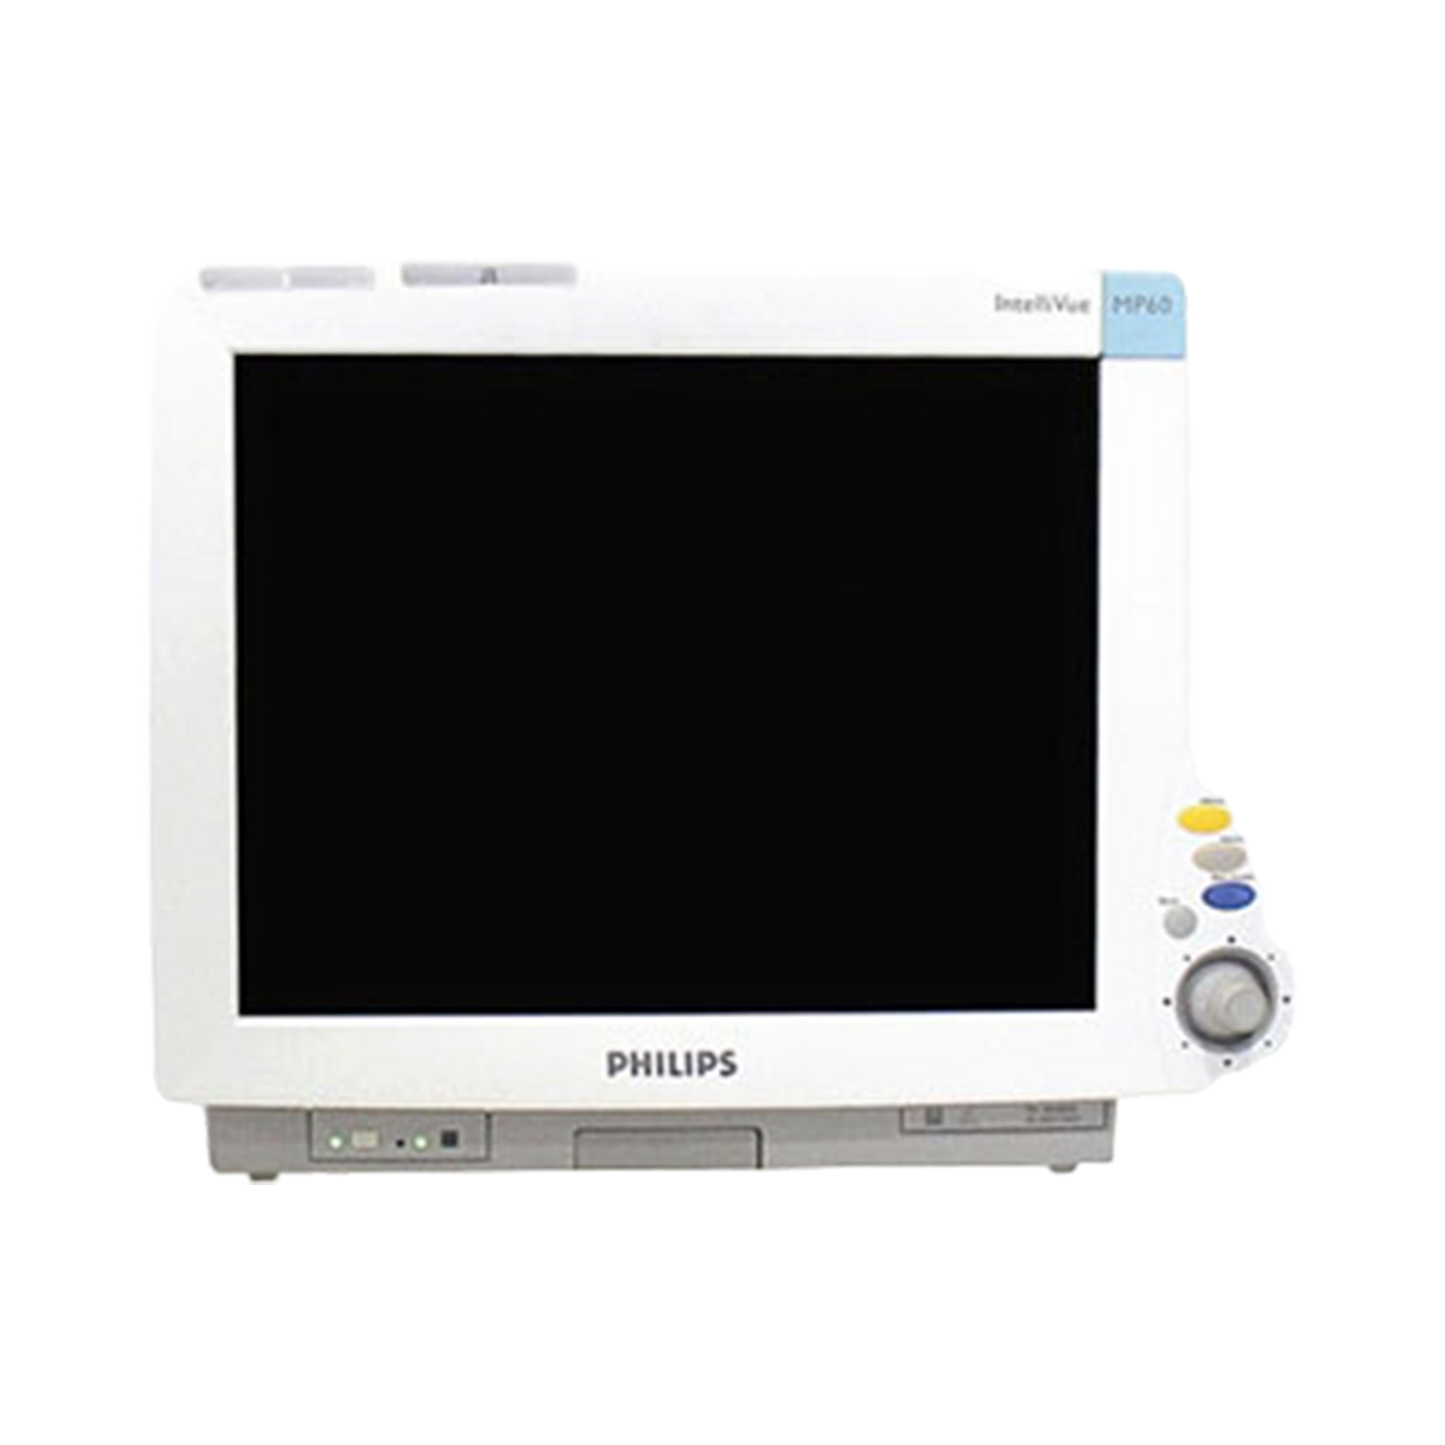 Philips Intellivue MP60 M8006A Patient Monitor